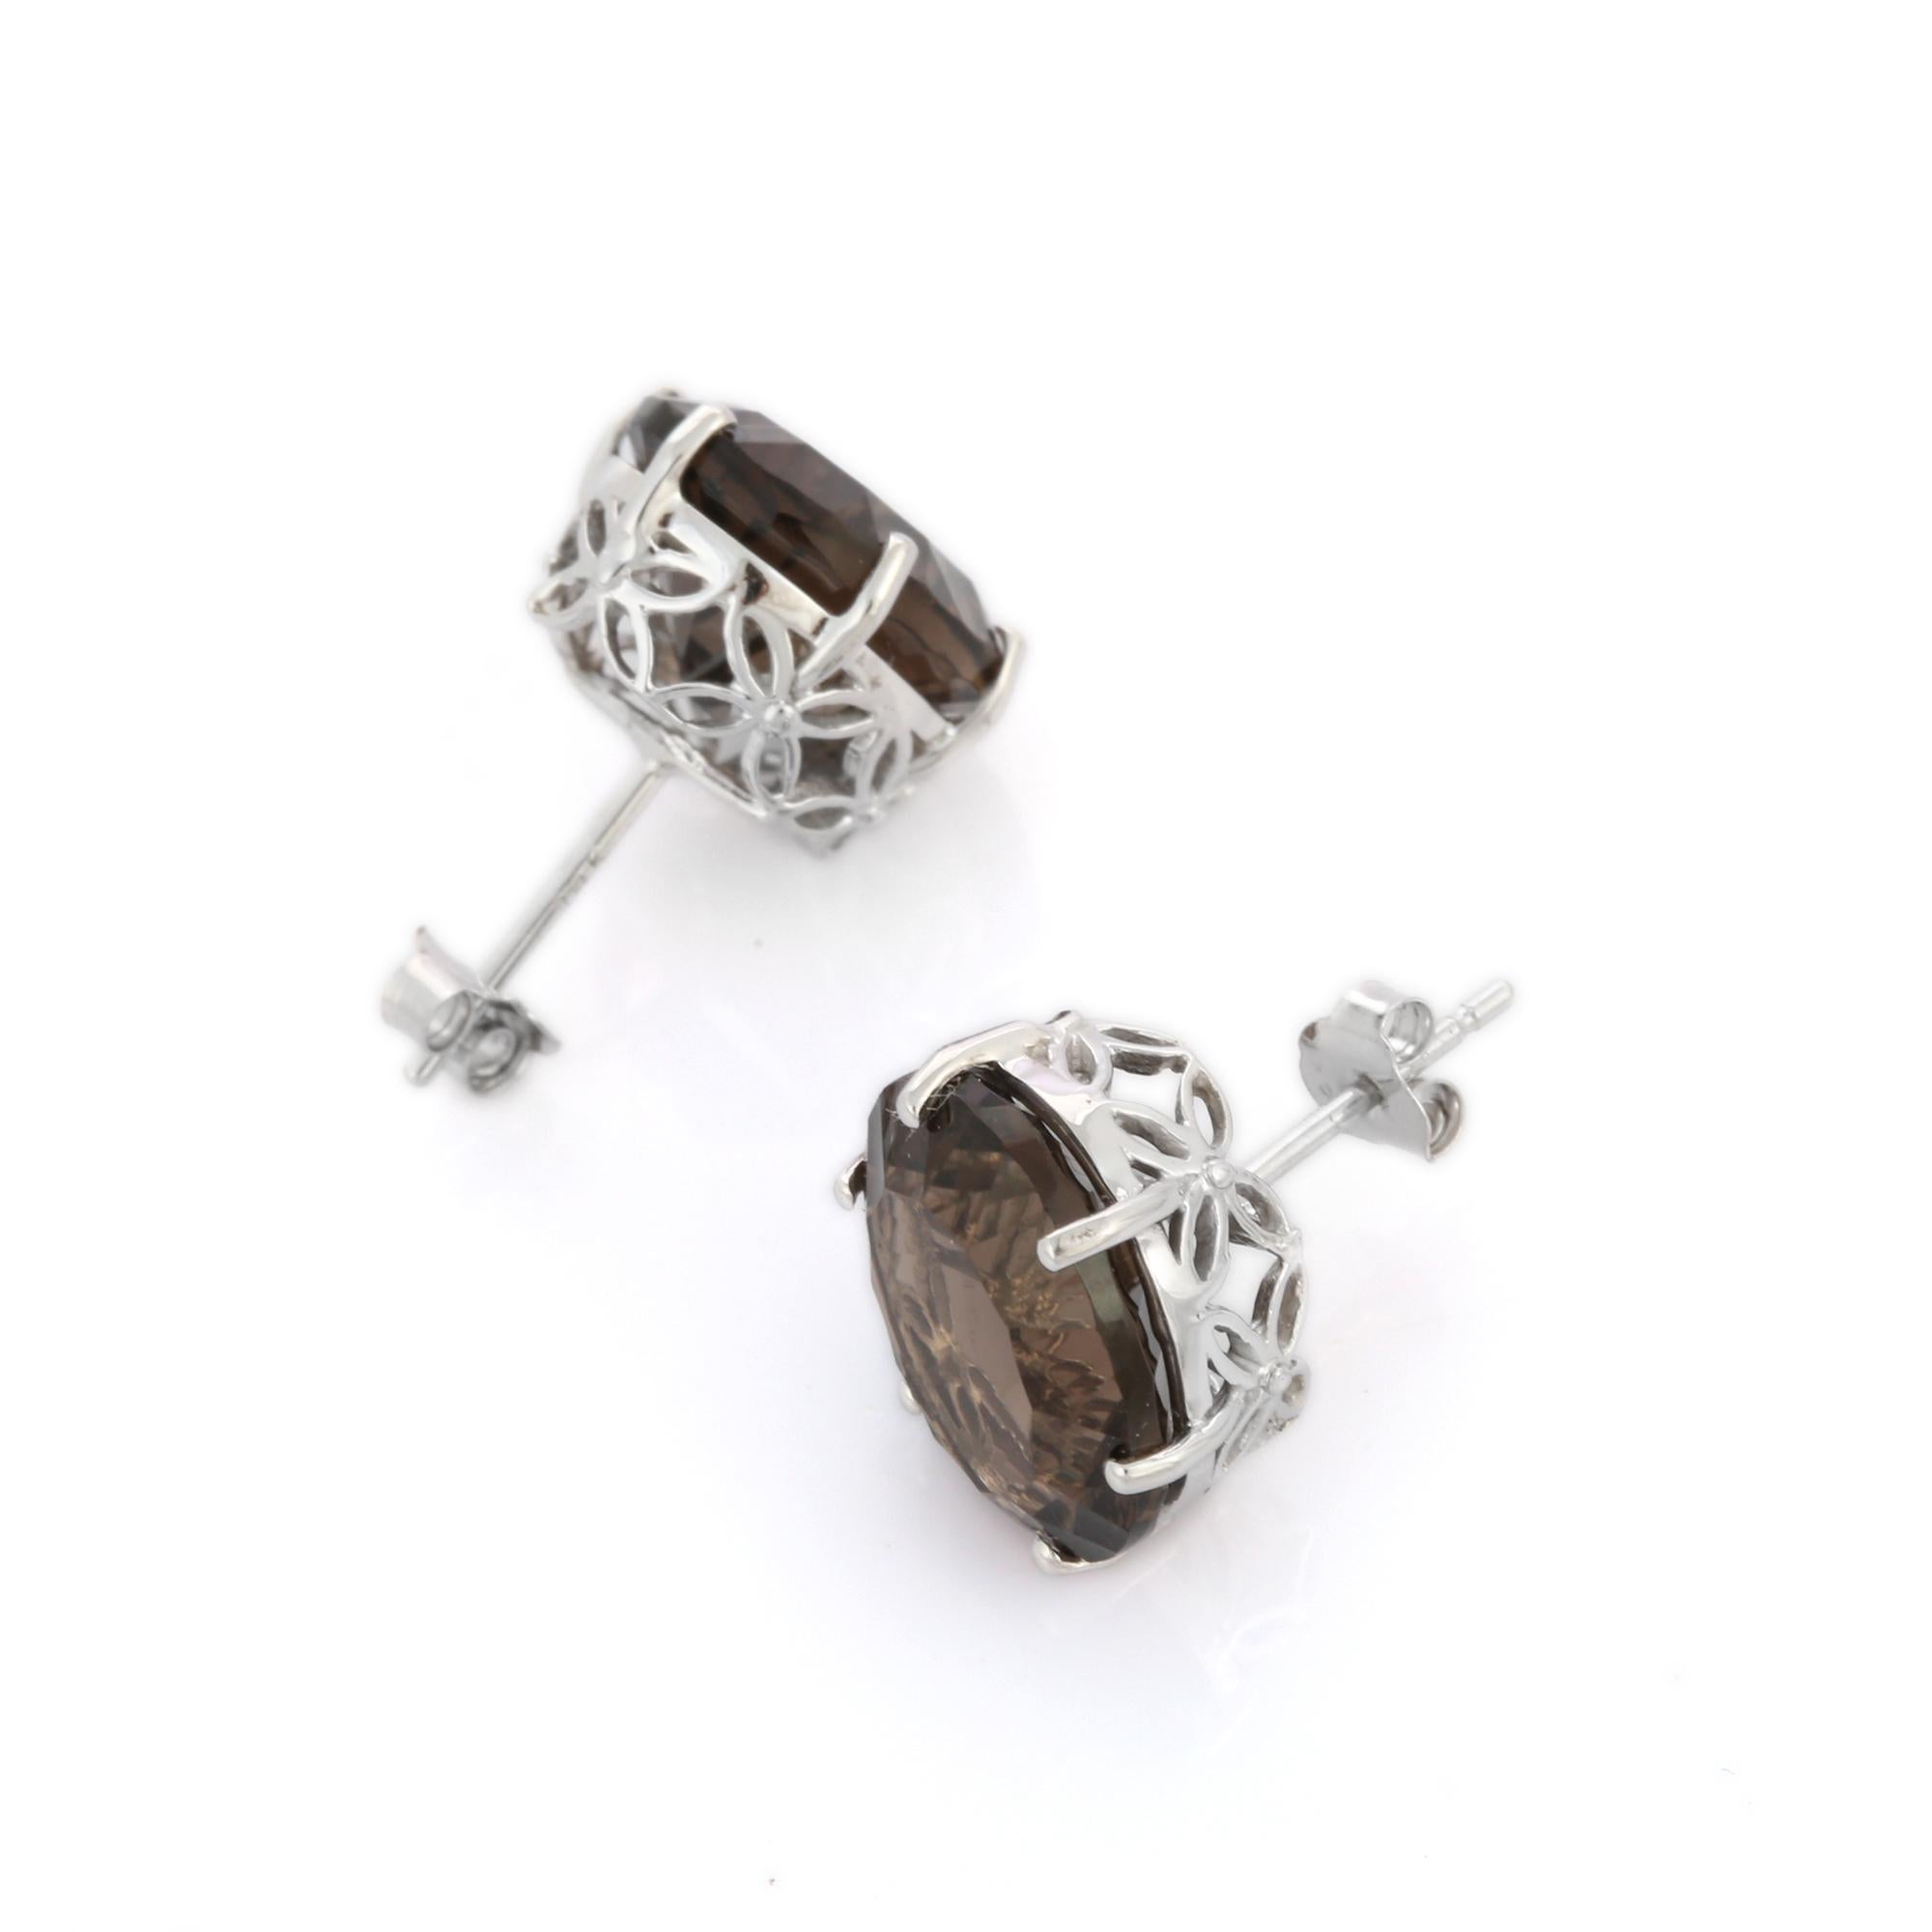 Studs create a subtle beauty while showcasing the colors of the natural precious gemstones making a statement.
Oval cut smoky quartz studs in 14K gold. Embrace your look with these stunning pair of earrings suitable for any occasion to complete your